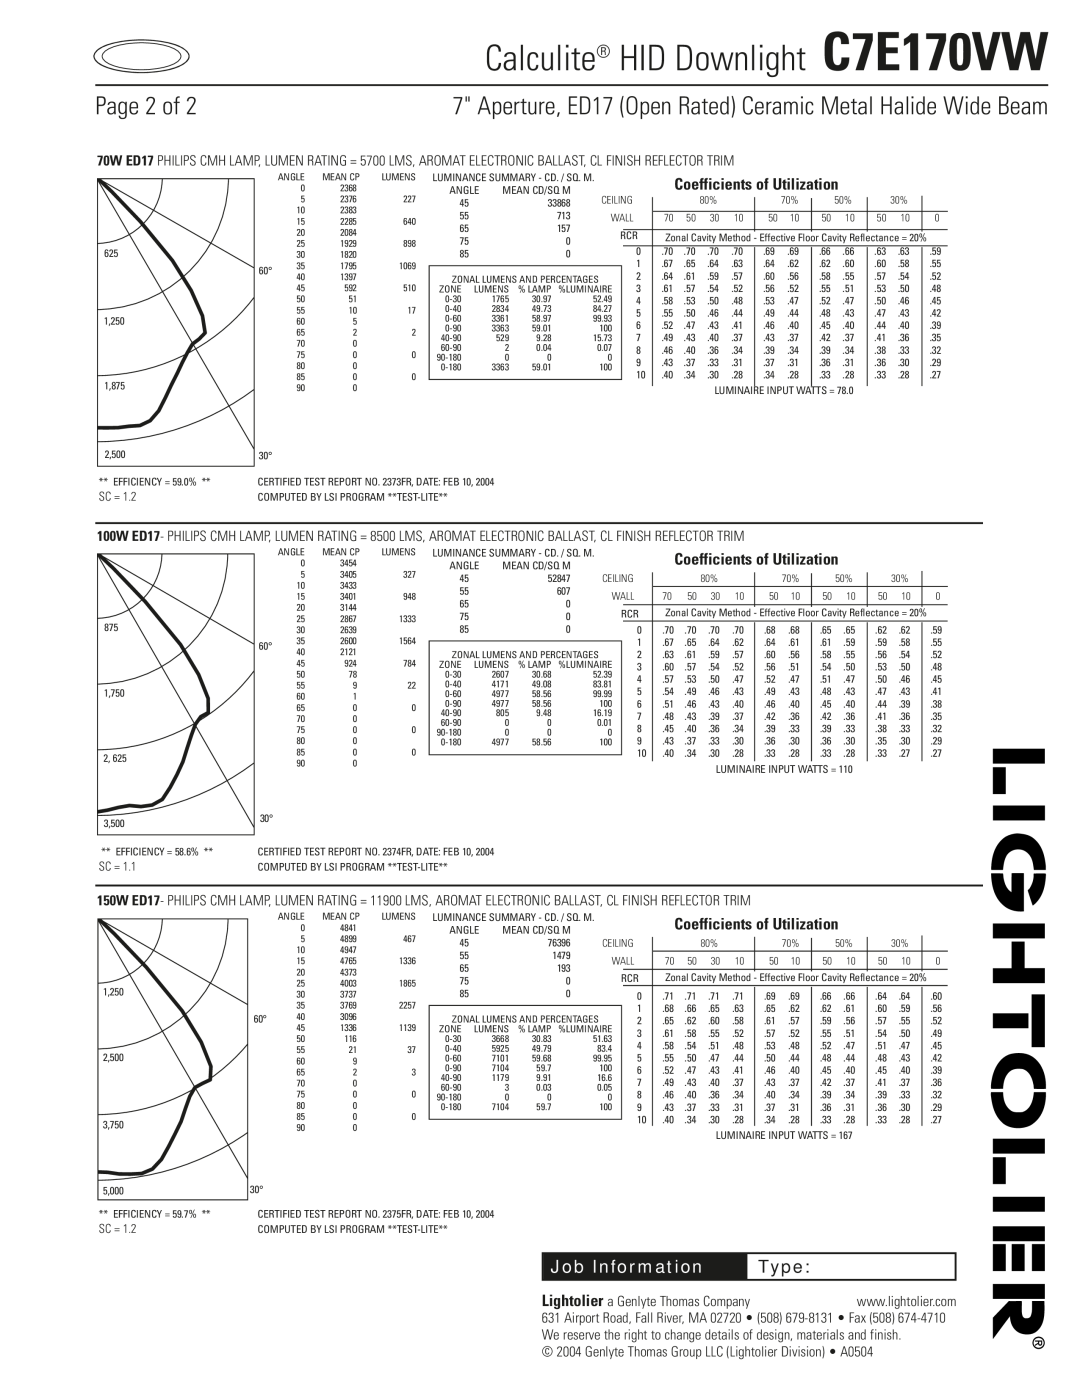 Lightolier specifications Page 2 of, Calculite HID Downlight C7E170VW, Job Information, Type 